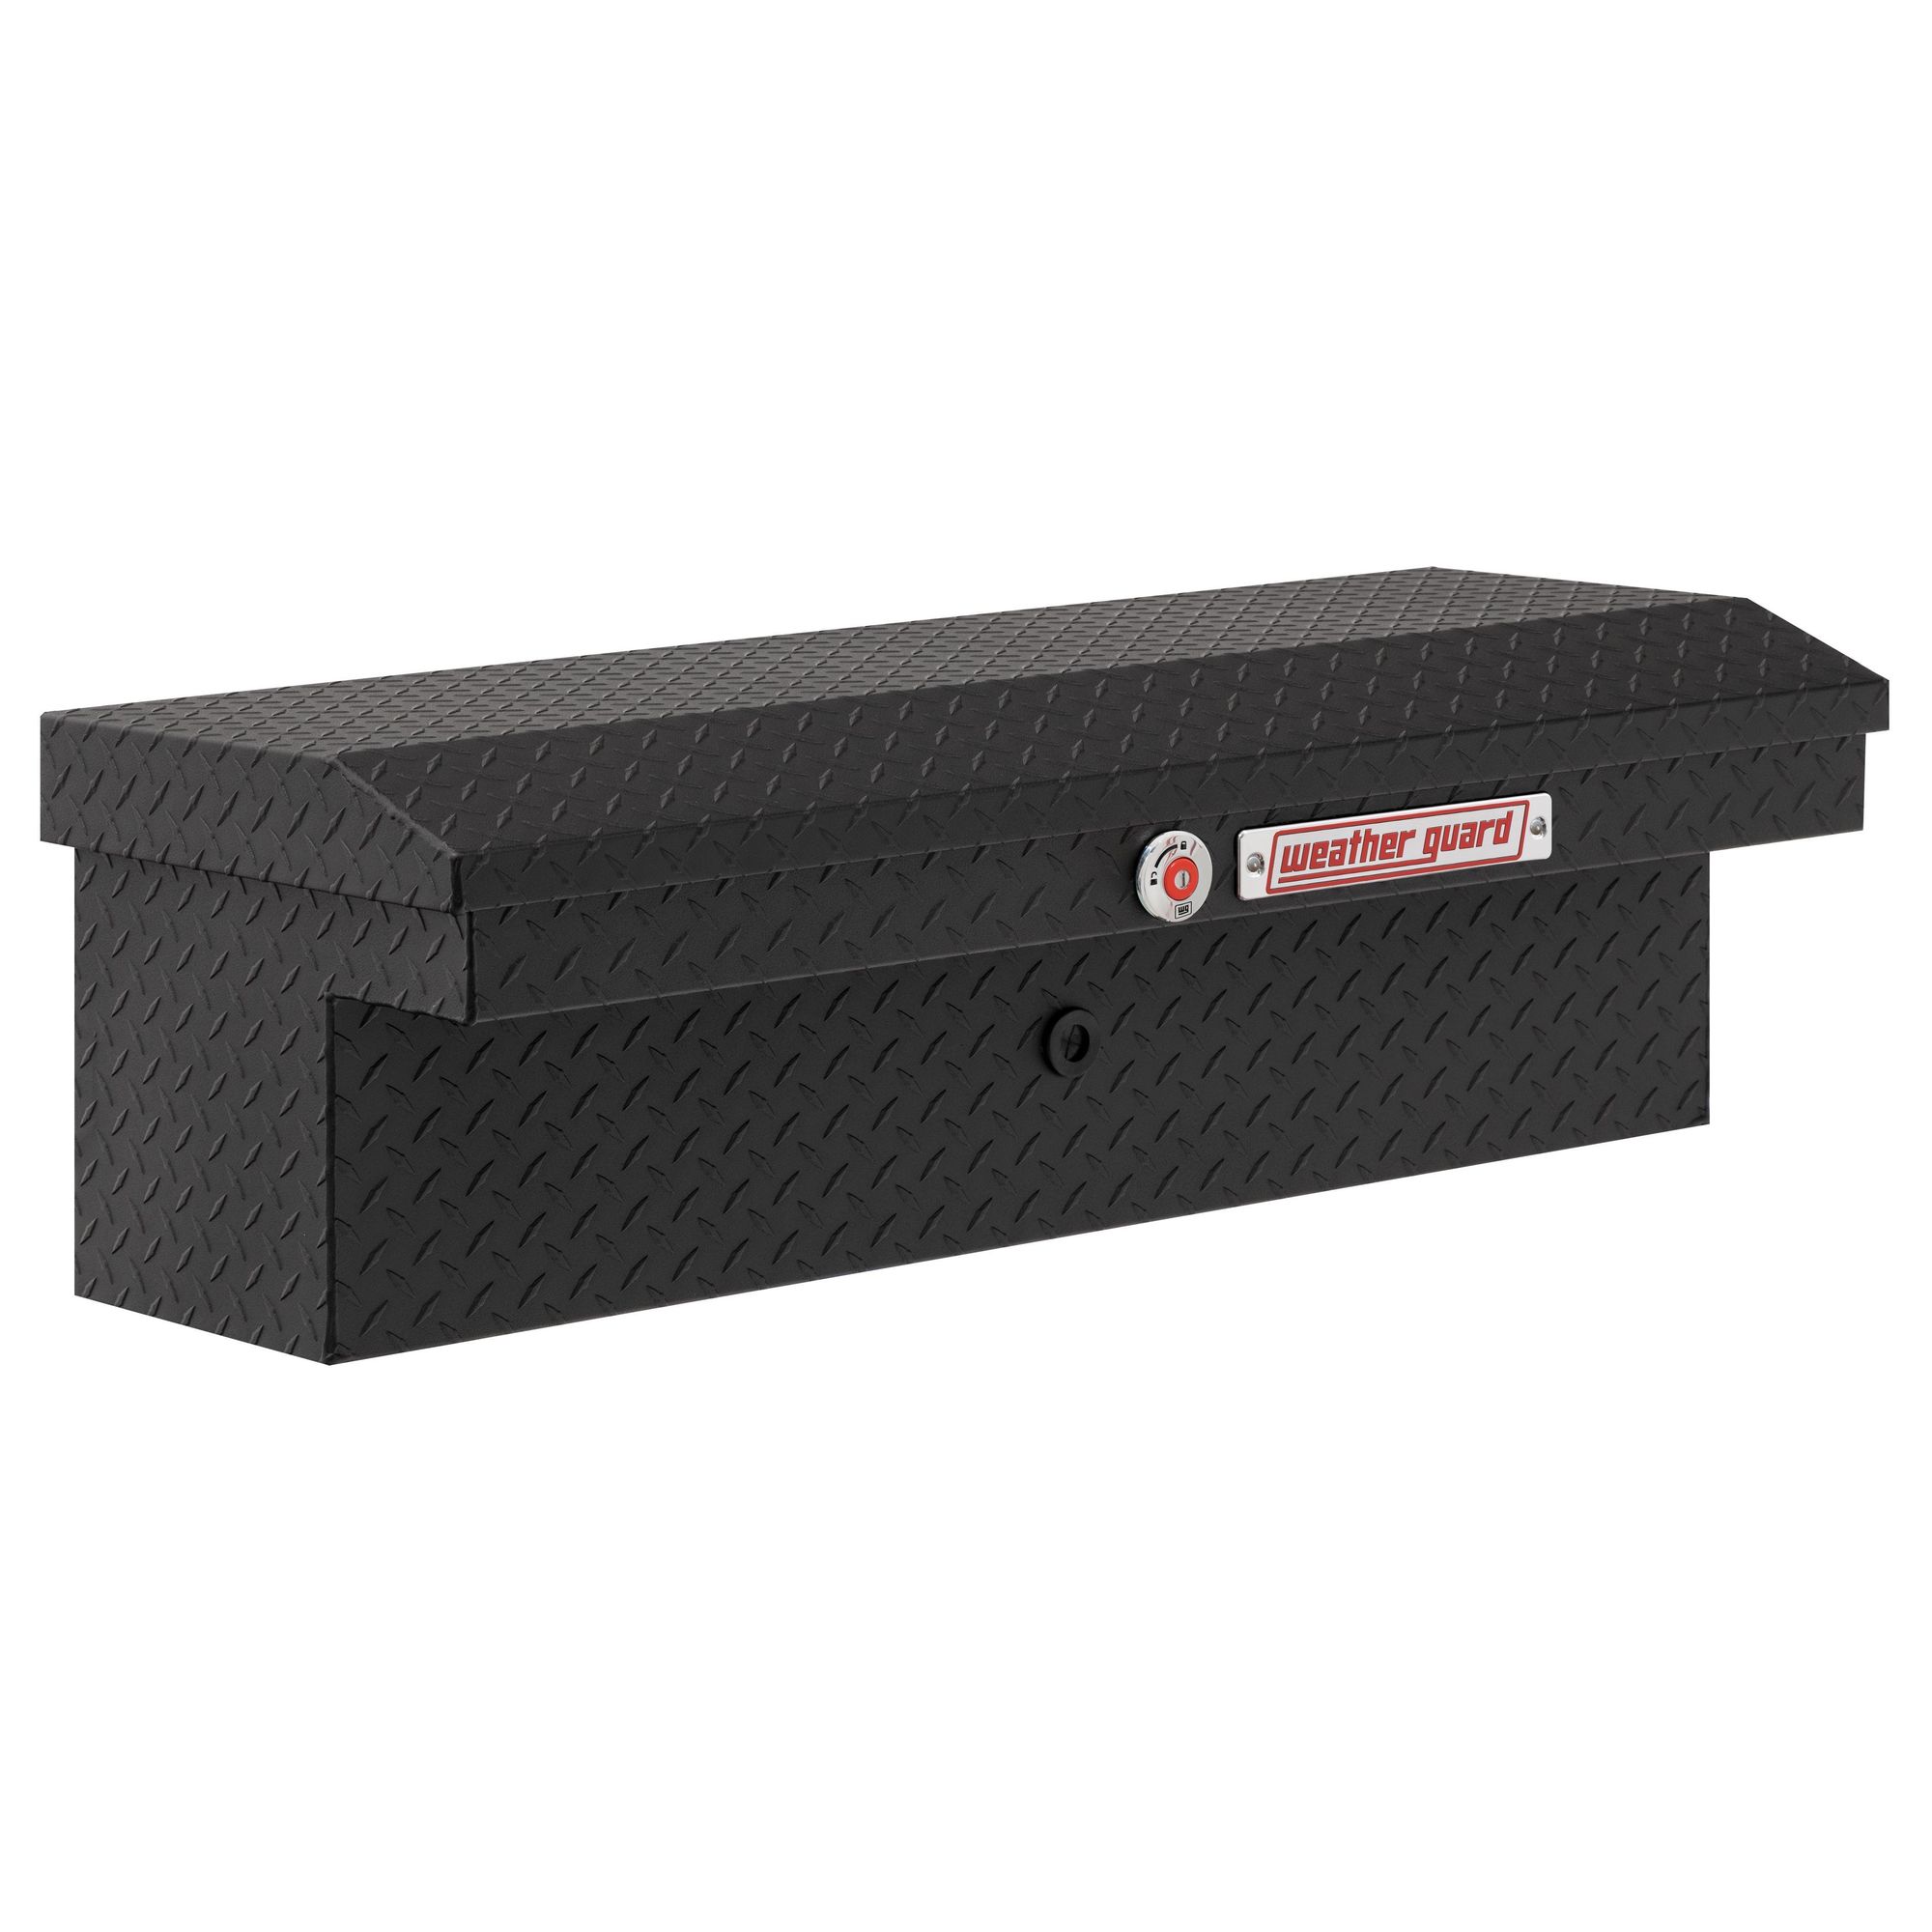 Weather Guard, 41Inch L Low Profile, Lo-Side Box, Width 41 in, Material Aluminum, Color Finish Textured Matte Black, Model 180-52-04